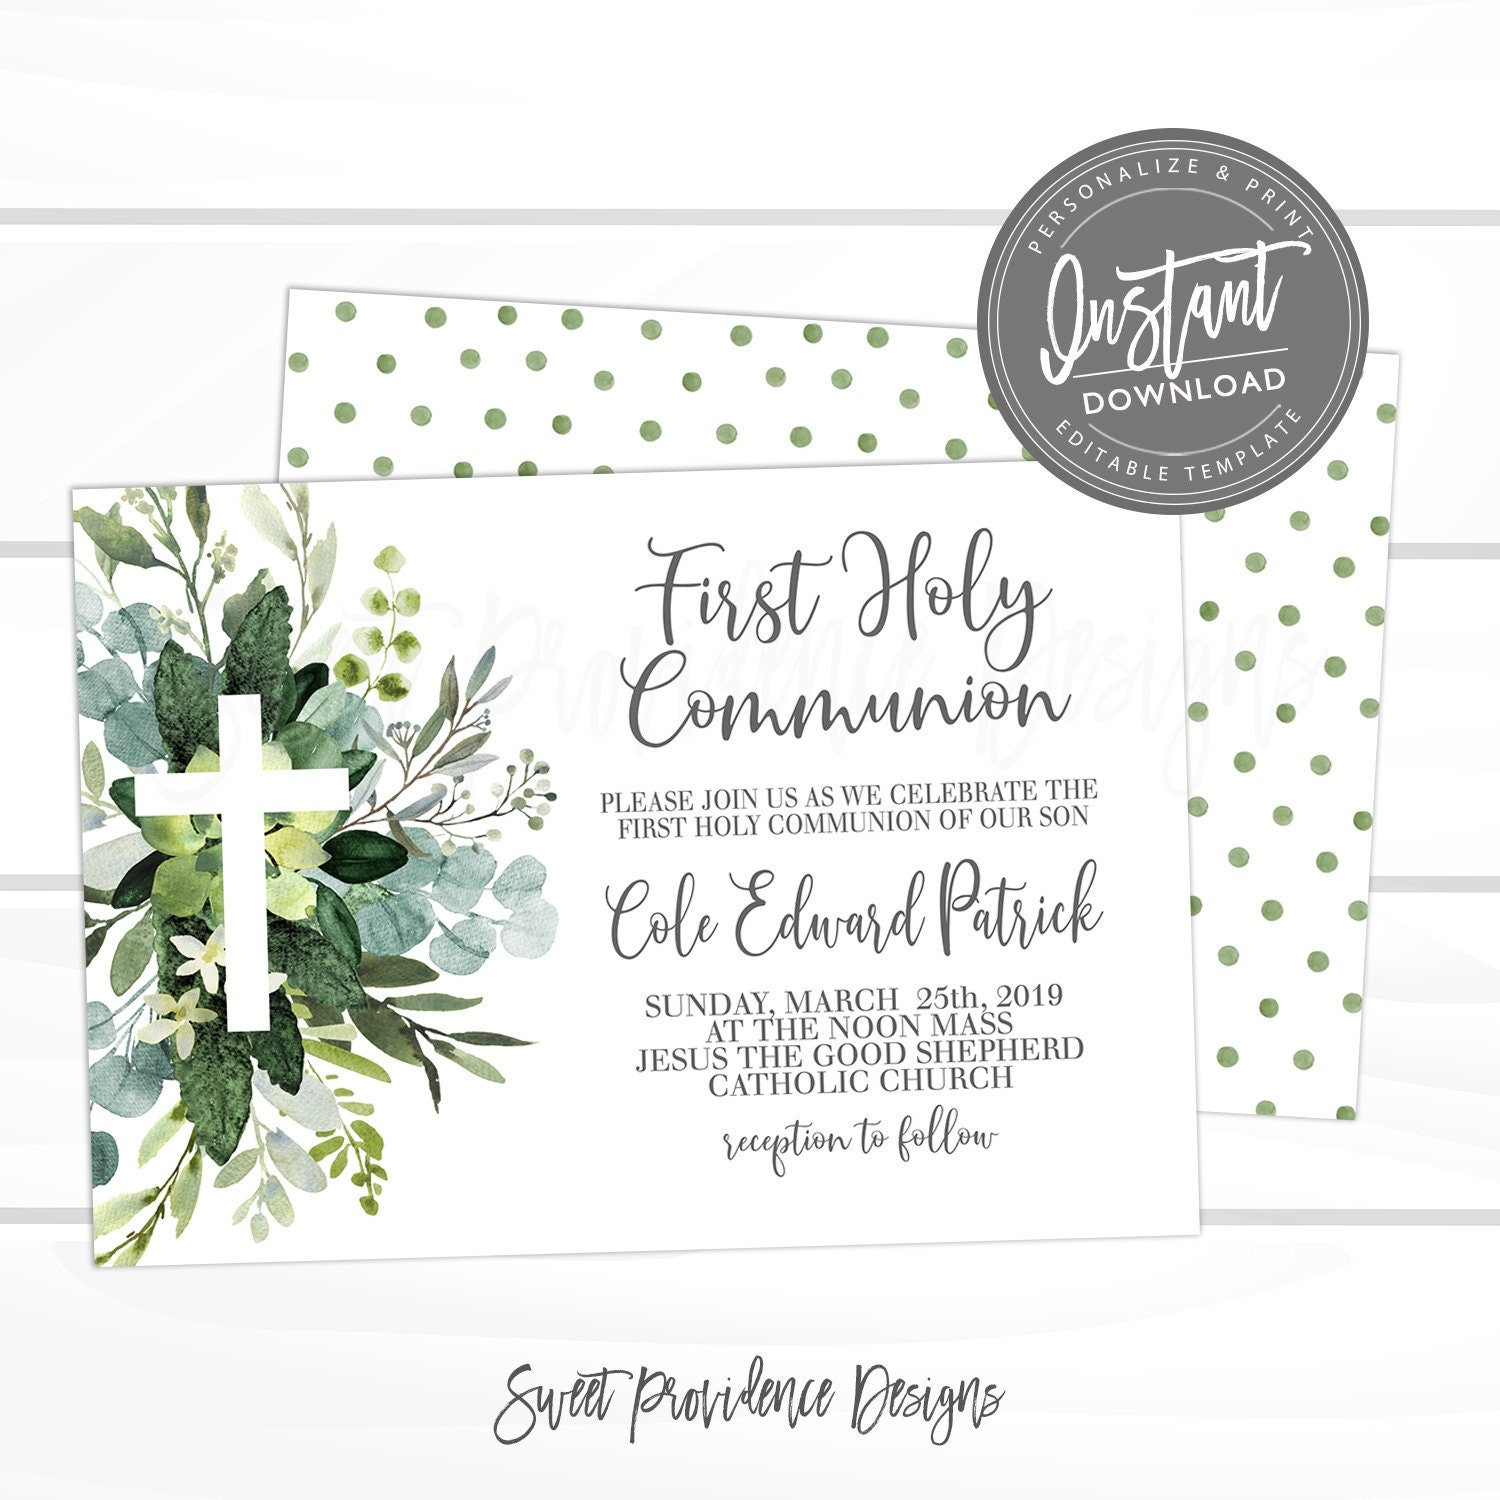 First Communion Invitation EDITABLE Greenery 1st Holy Communion Party PRINTABLE Boy First Religious Eucalyptus Invite Instant Access Sweet Providence Designs - Free Printable 1st Communion Invitations